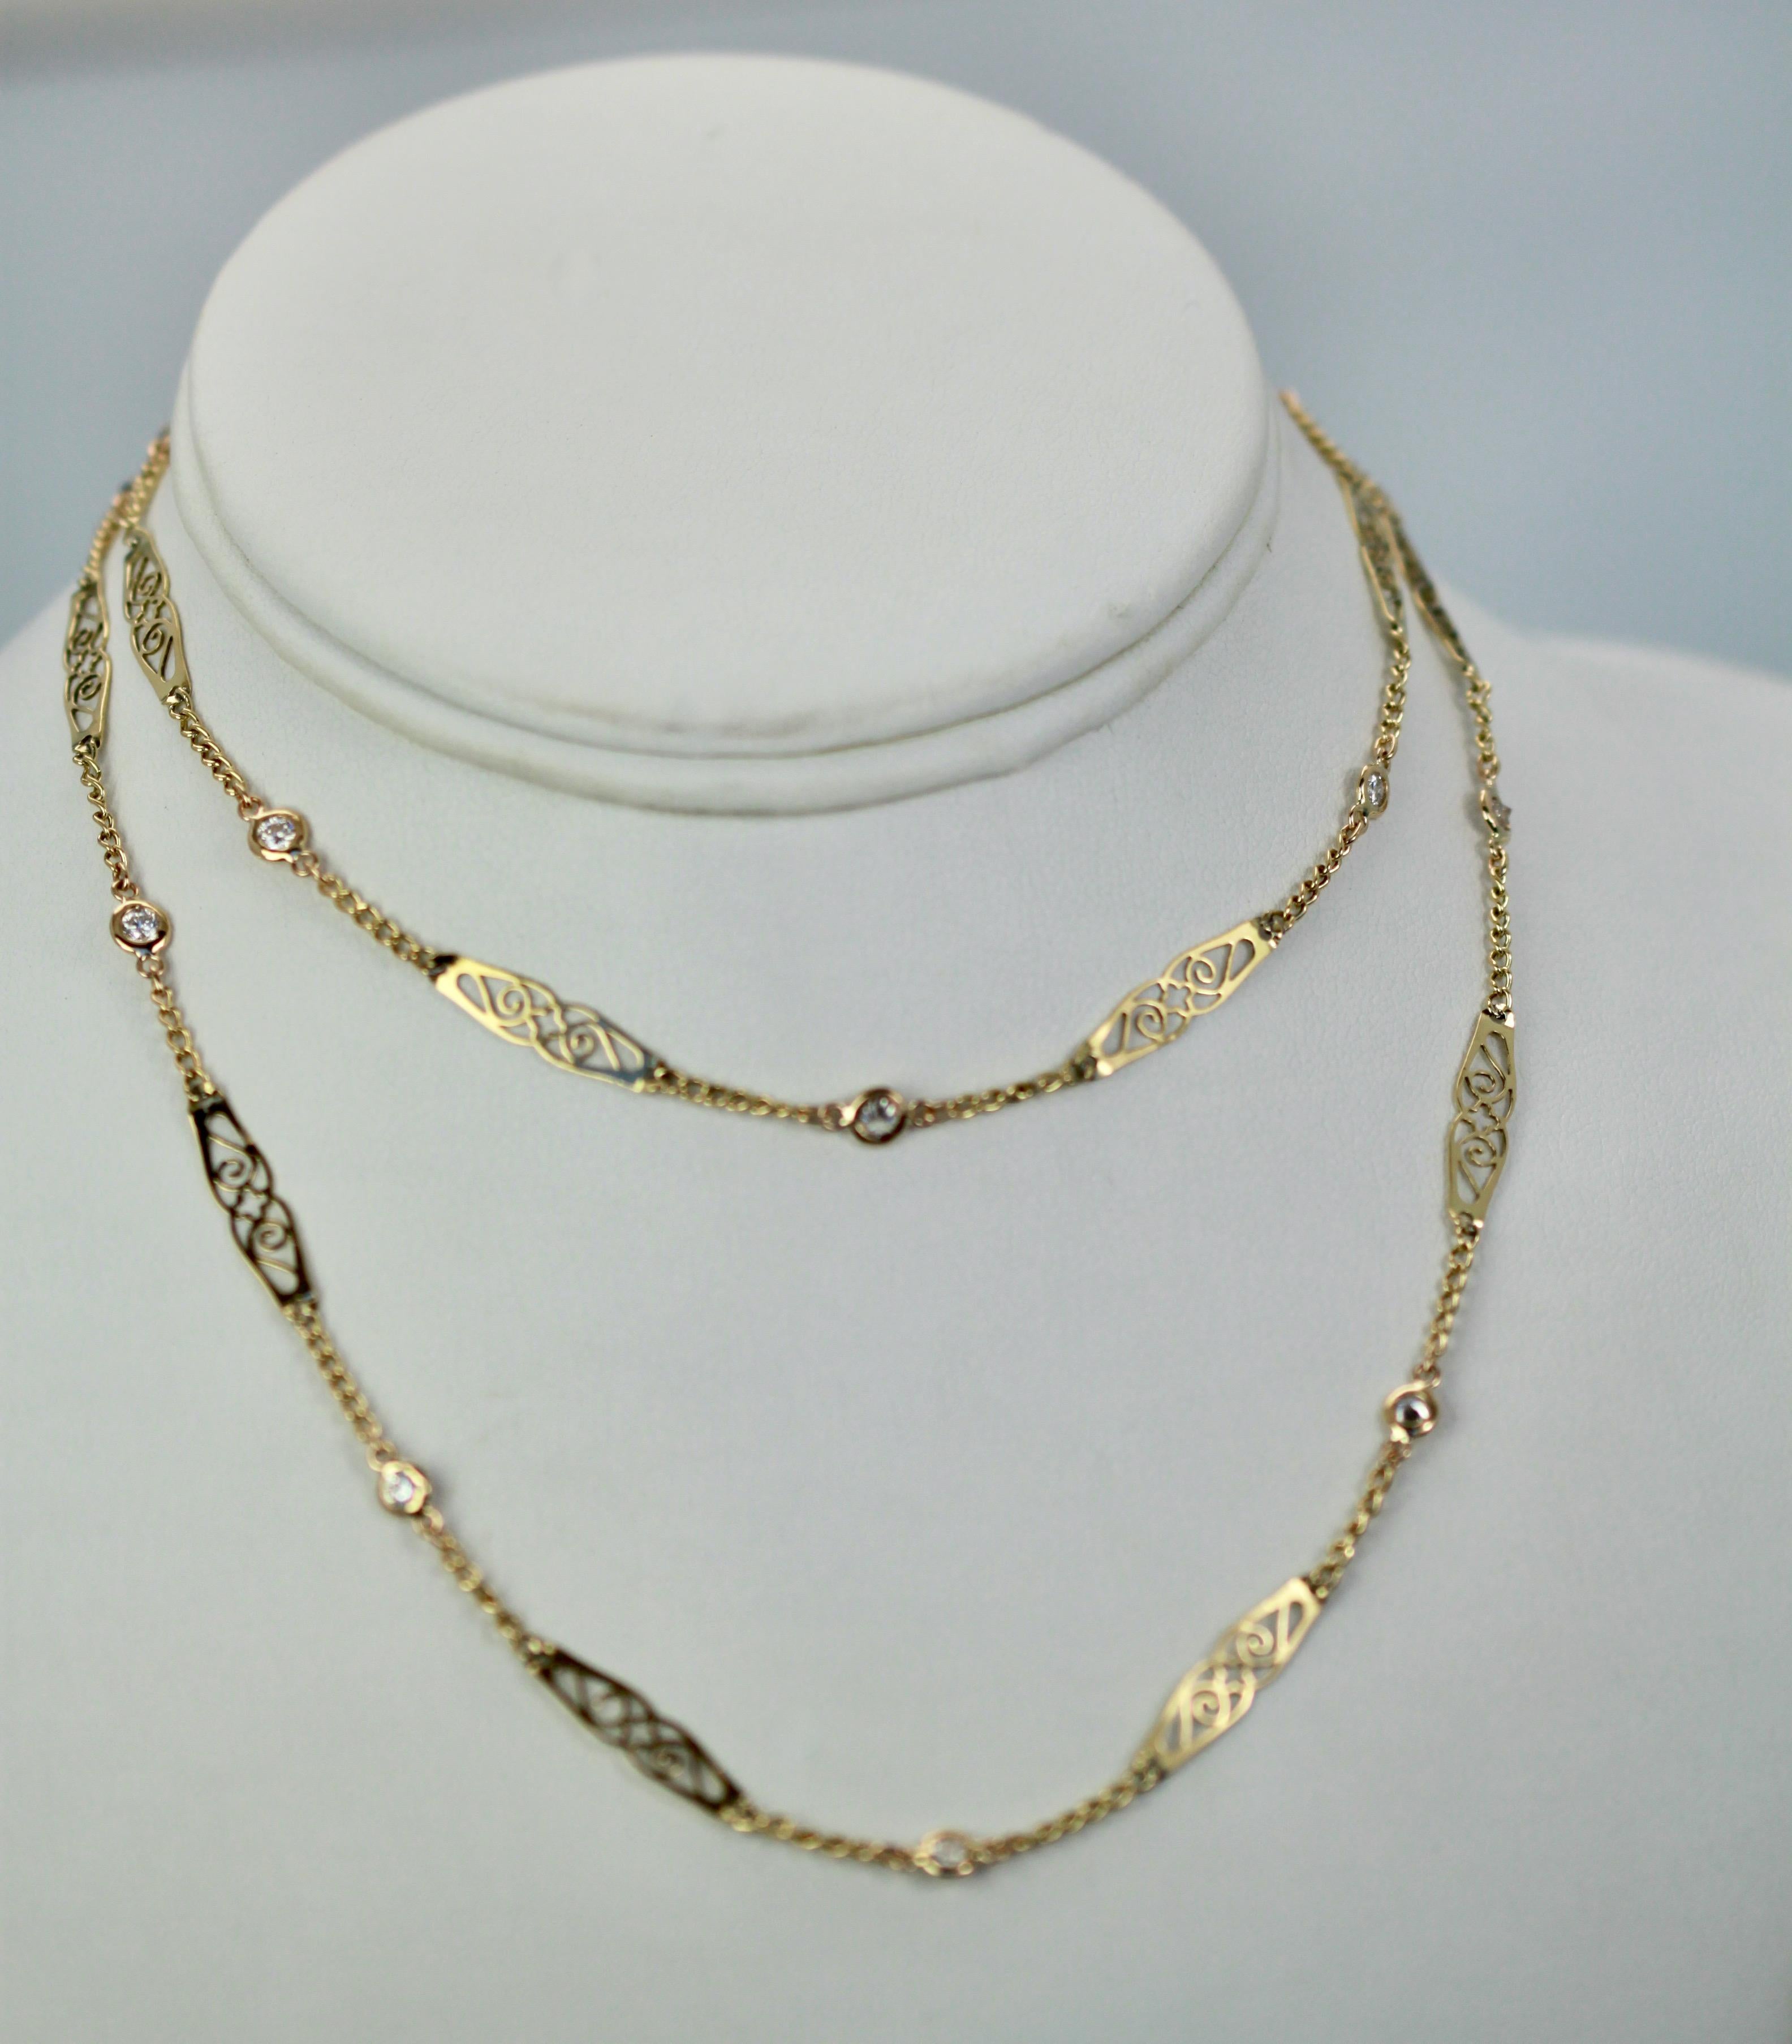 This lovely chain is made from 14K Yellow gold with a beautiful filigree design.  It is studded with Diamonds between each filigree section. Throughout the chain are Diamonds that light up this beautiful chain.  There are 1.16 Carats of G, VS2